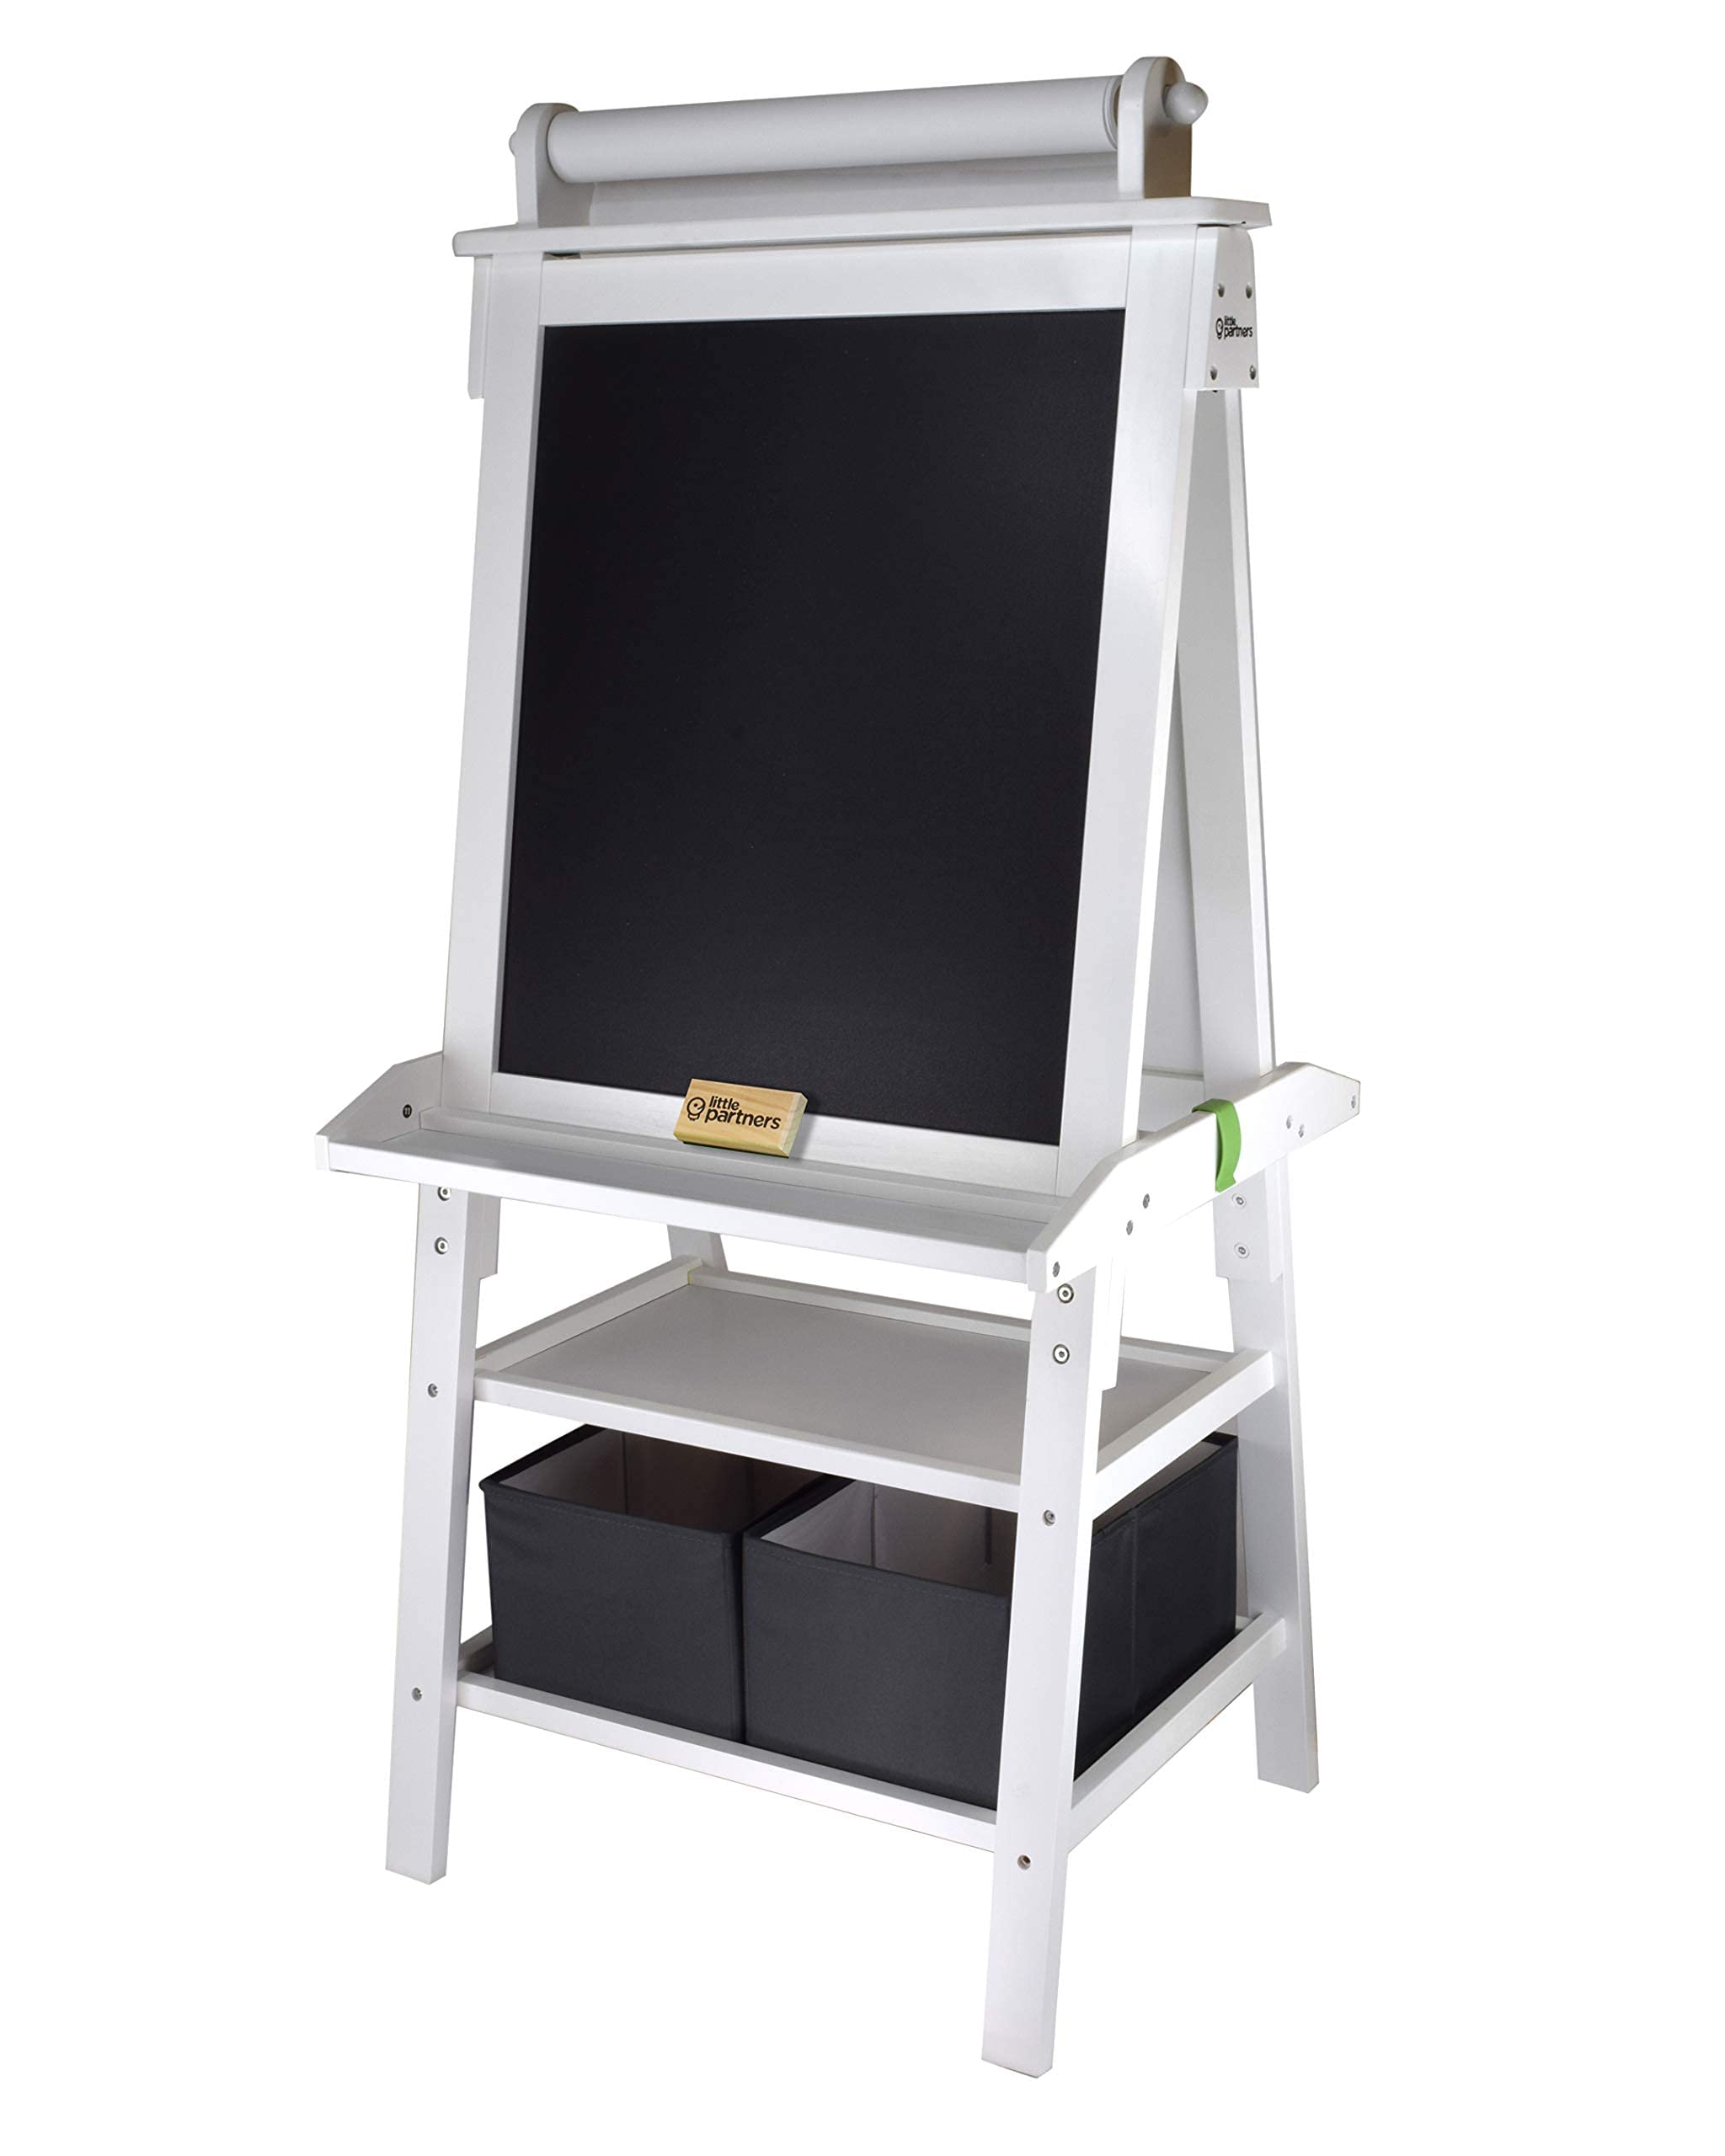 3-in-1 Art Easel by Little Partners 2-Sided A-Frame Art Easel with Chalk Board, Dry Erase, Storage, Paper Feed and Accessories for Toddlers (Soft White)